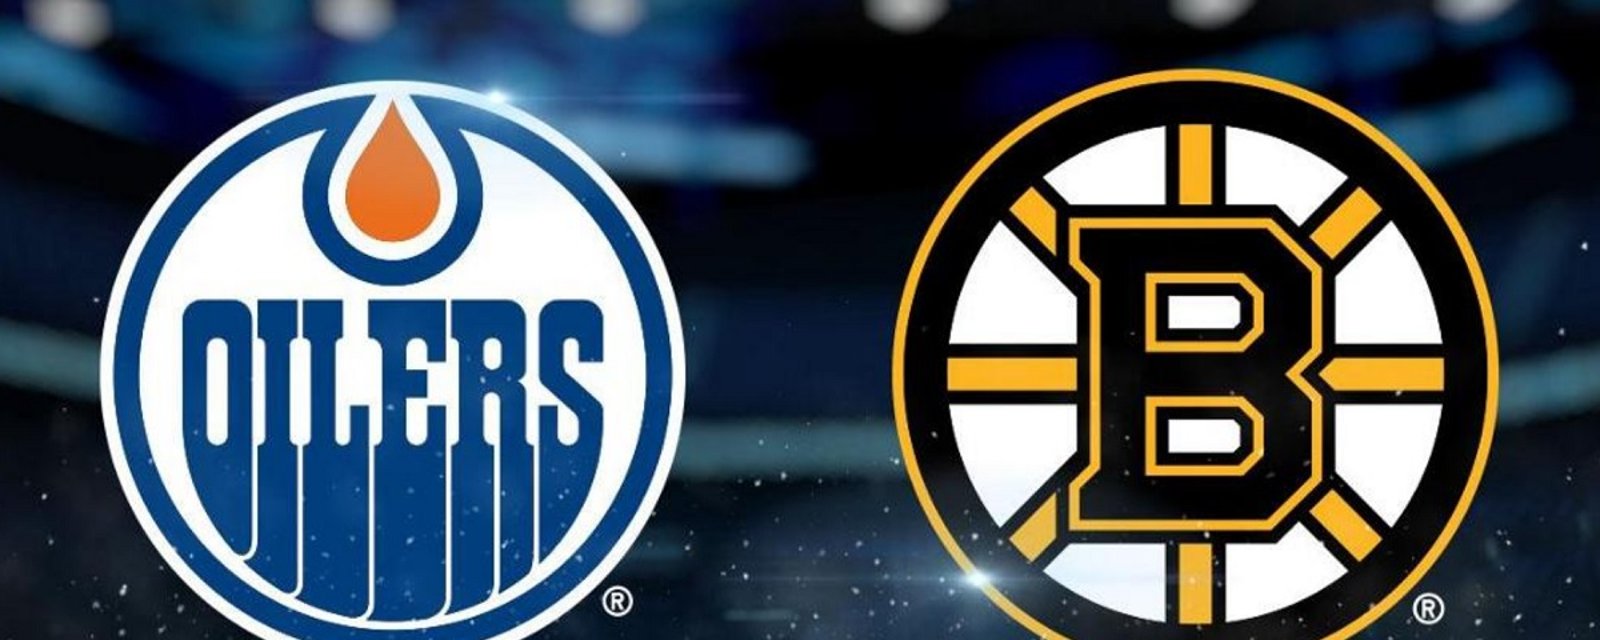 Rumors of a shocking trade between the Bruins and Oilers.